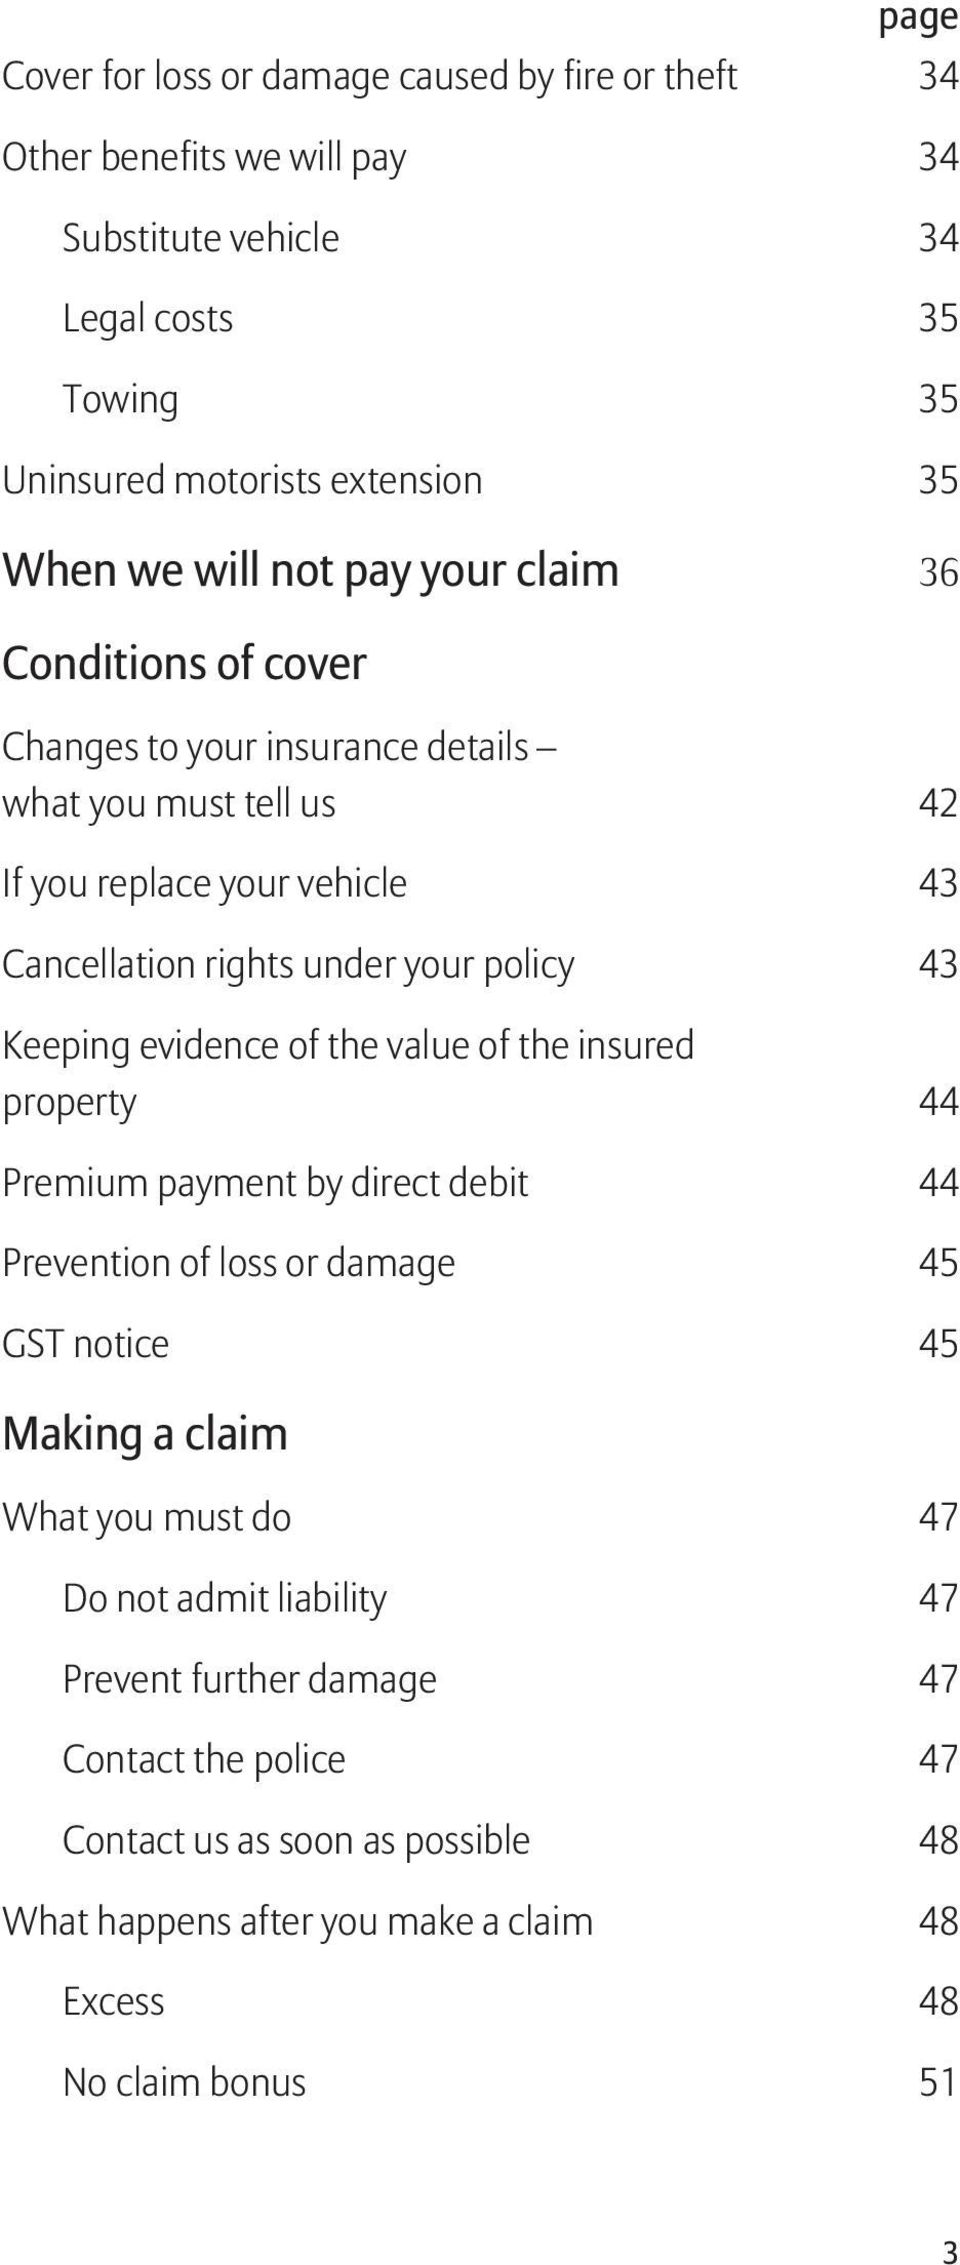 Keeping evidence of the value of the insured property 44 Premium payment by direct debit 44 Prevention of loss or damage 45 GST notice 45 Making a claim page What you must do